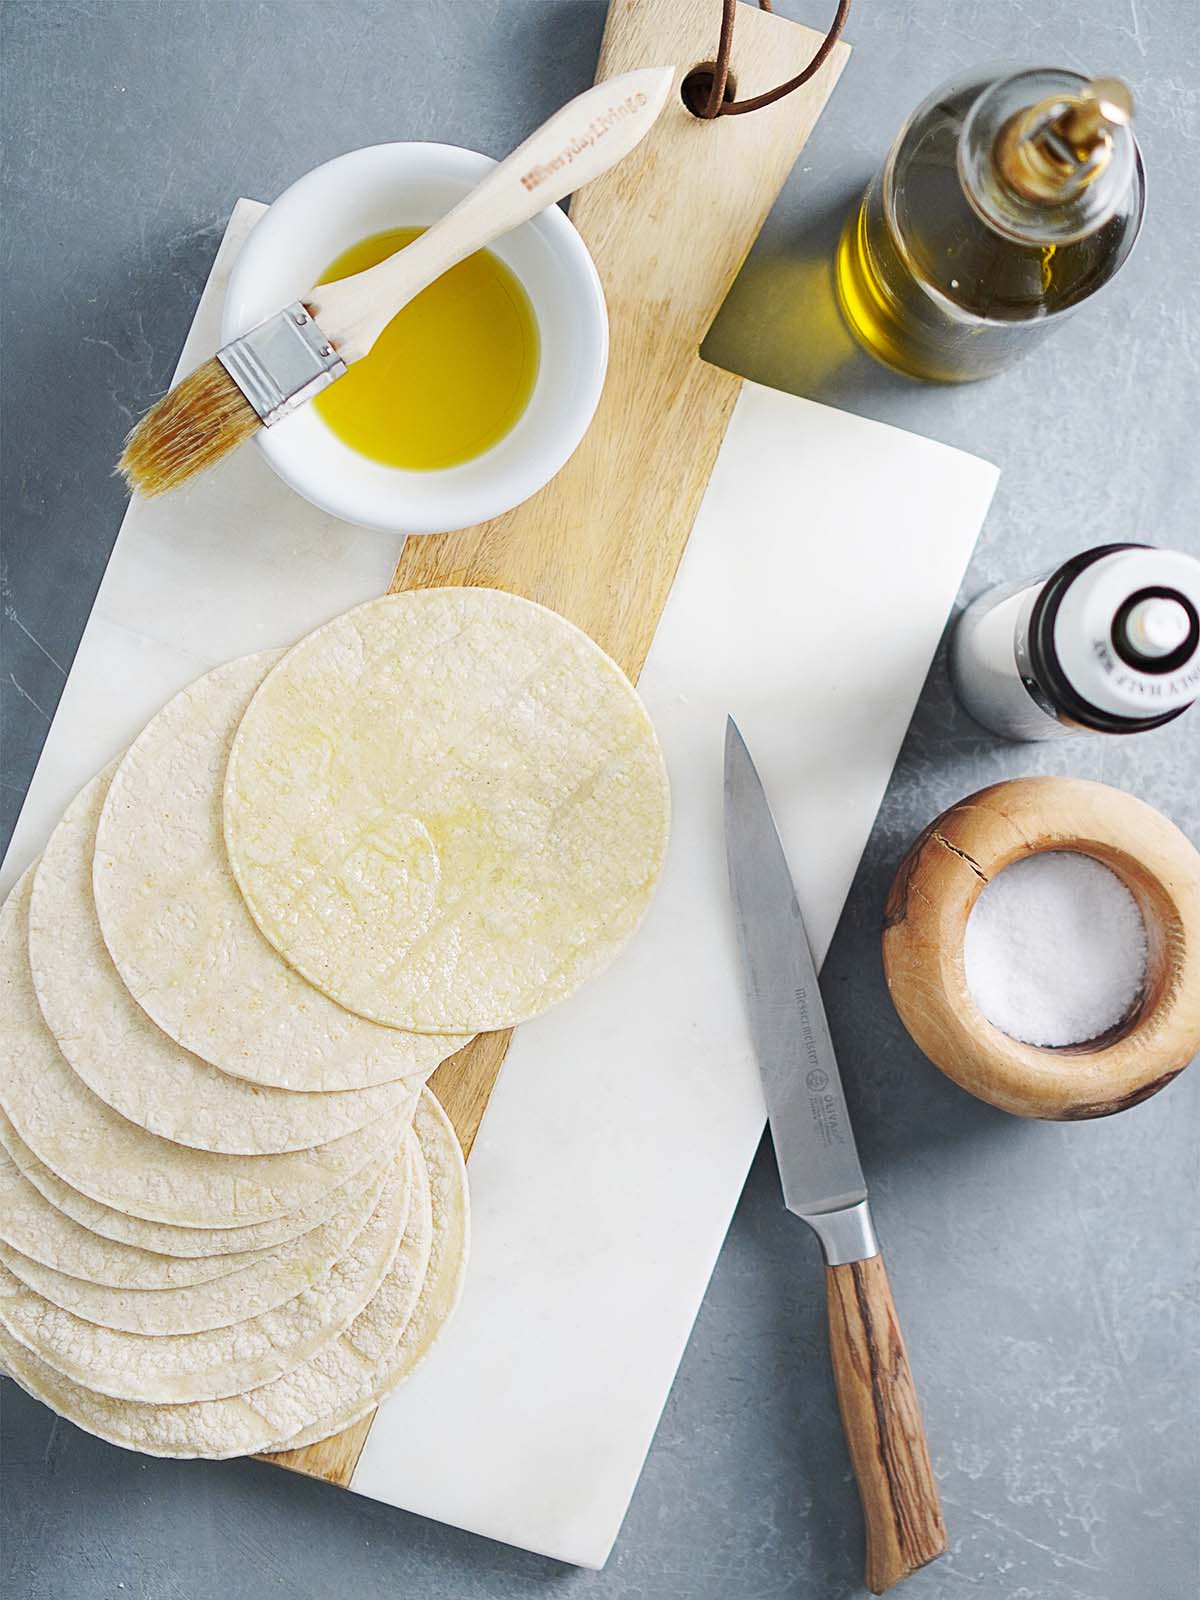 Corn tortillas placed on a cutting board with a small bowl of oil on the side.